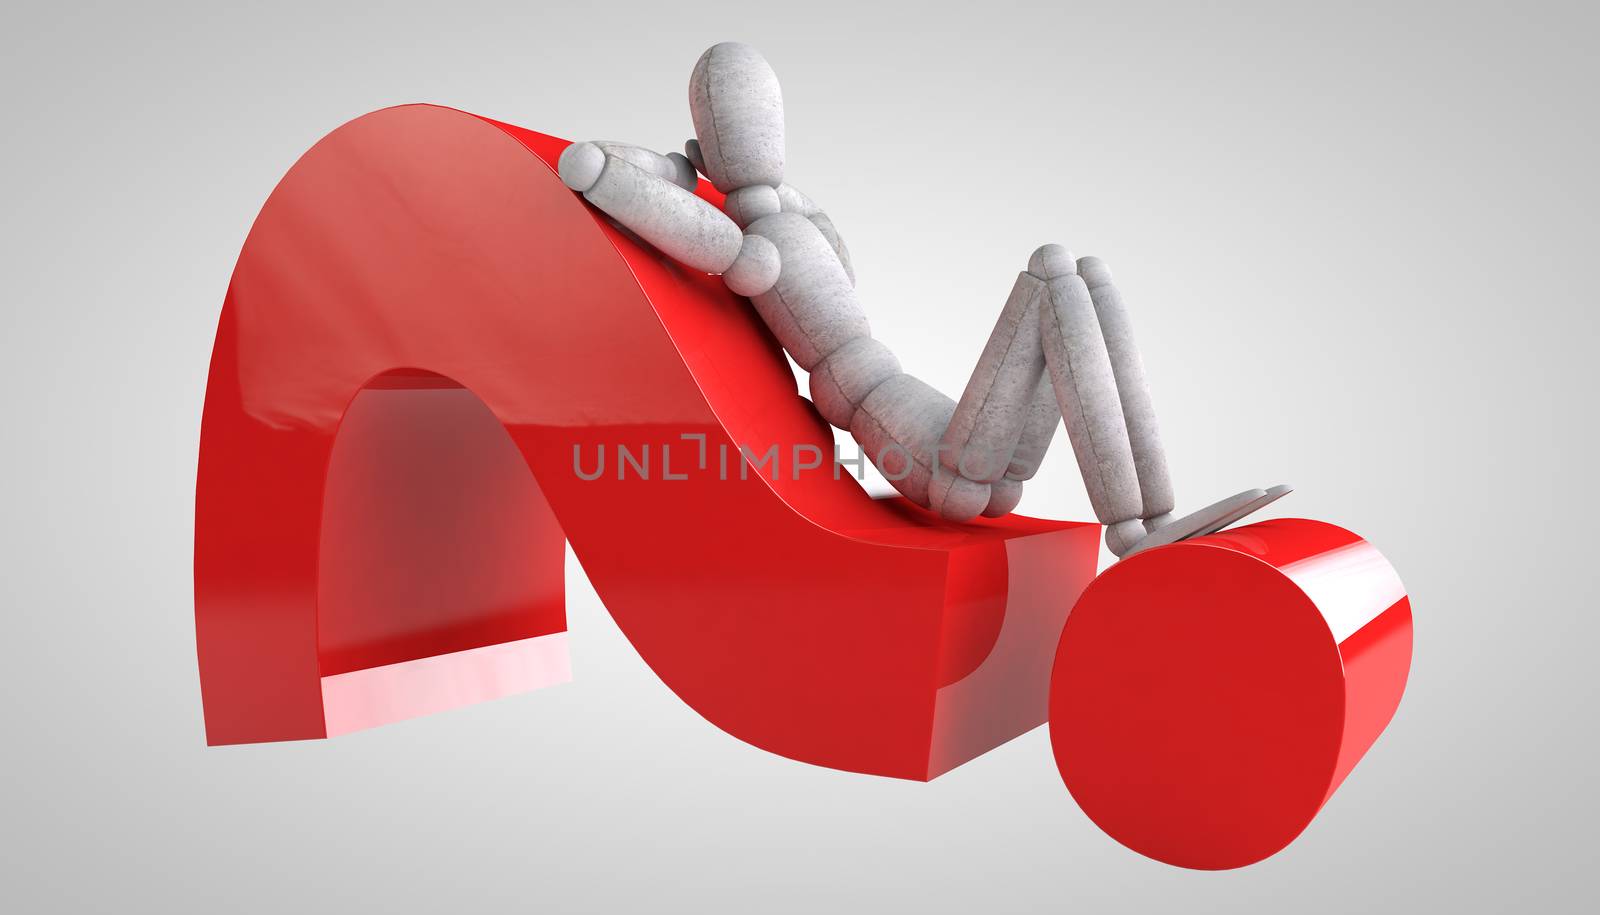 3d puppet model lying on a red question mark hands behind his head thrown back and reflect on the complex task